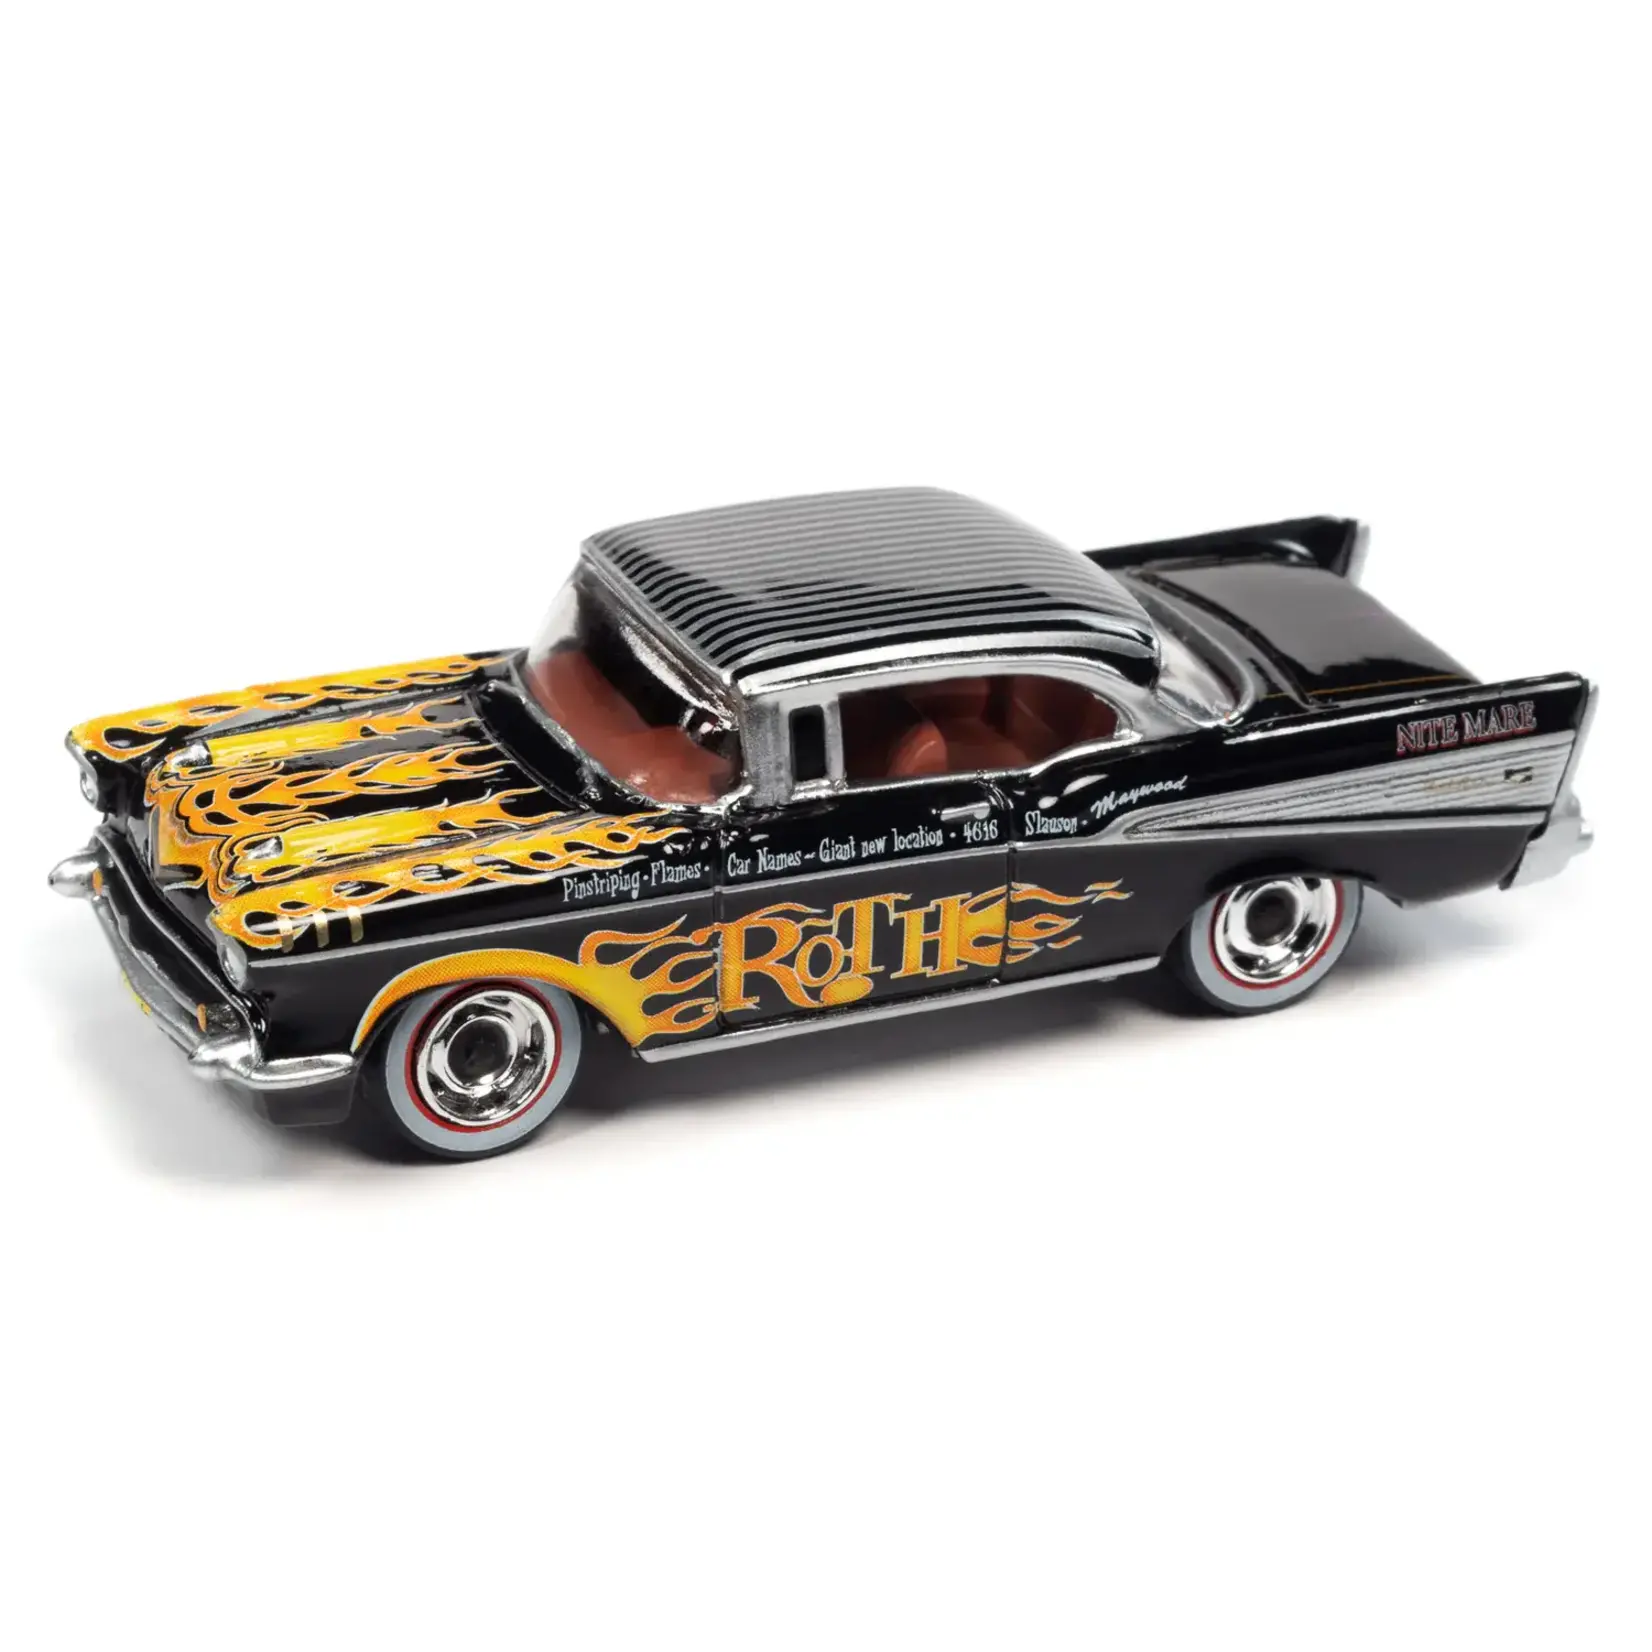 Johnny Lightning JLCC008 Johnny Lightning 1957 Chevy Bel Air (Ed Roth) (JL Collector Club Exclusive) 1:64 Scale Diecast